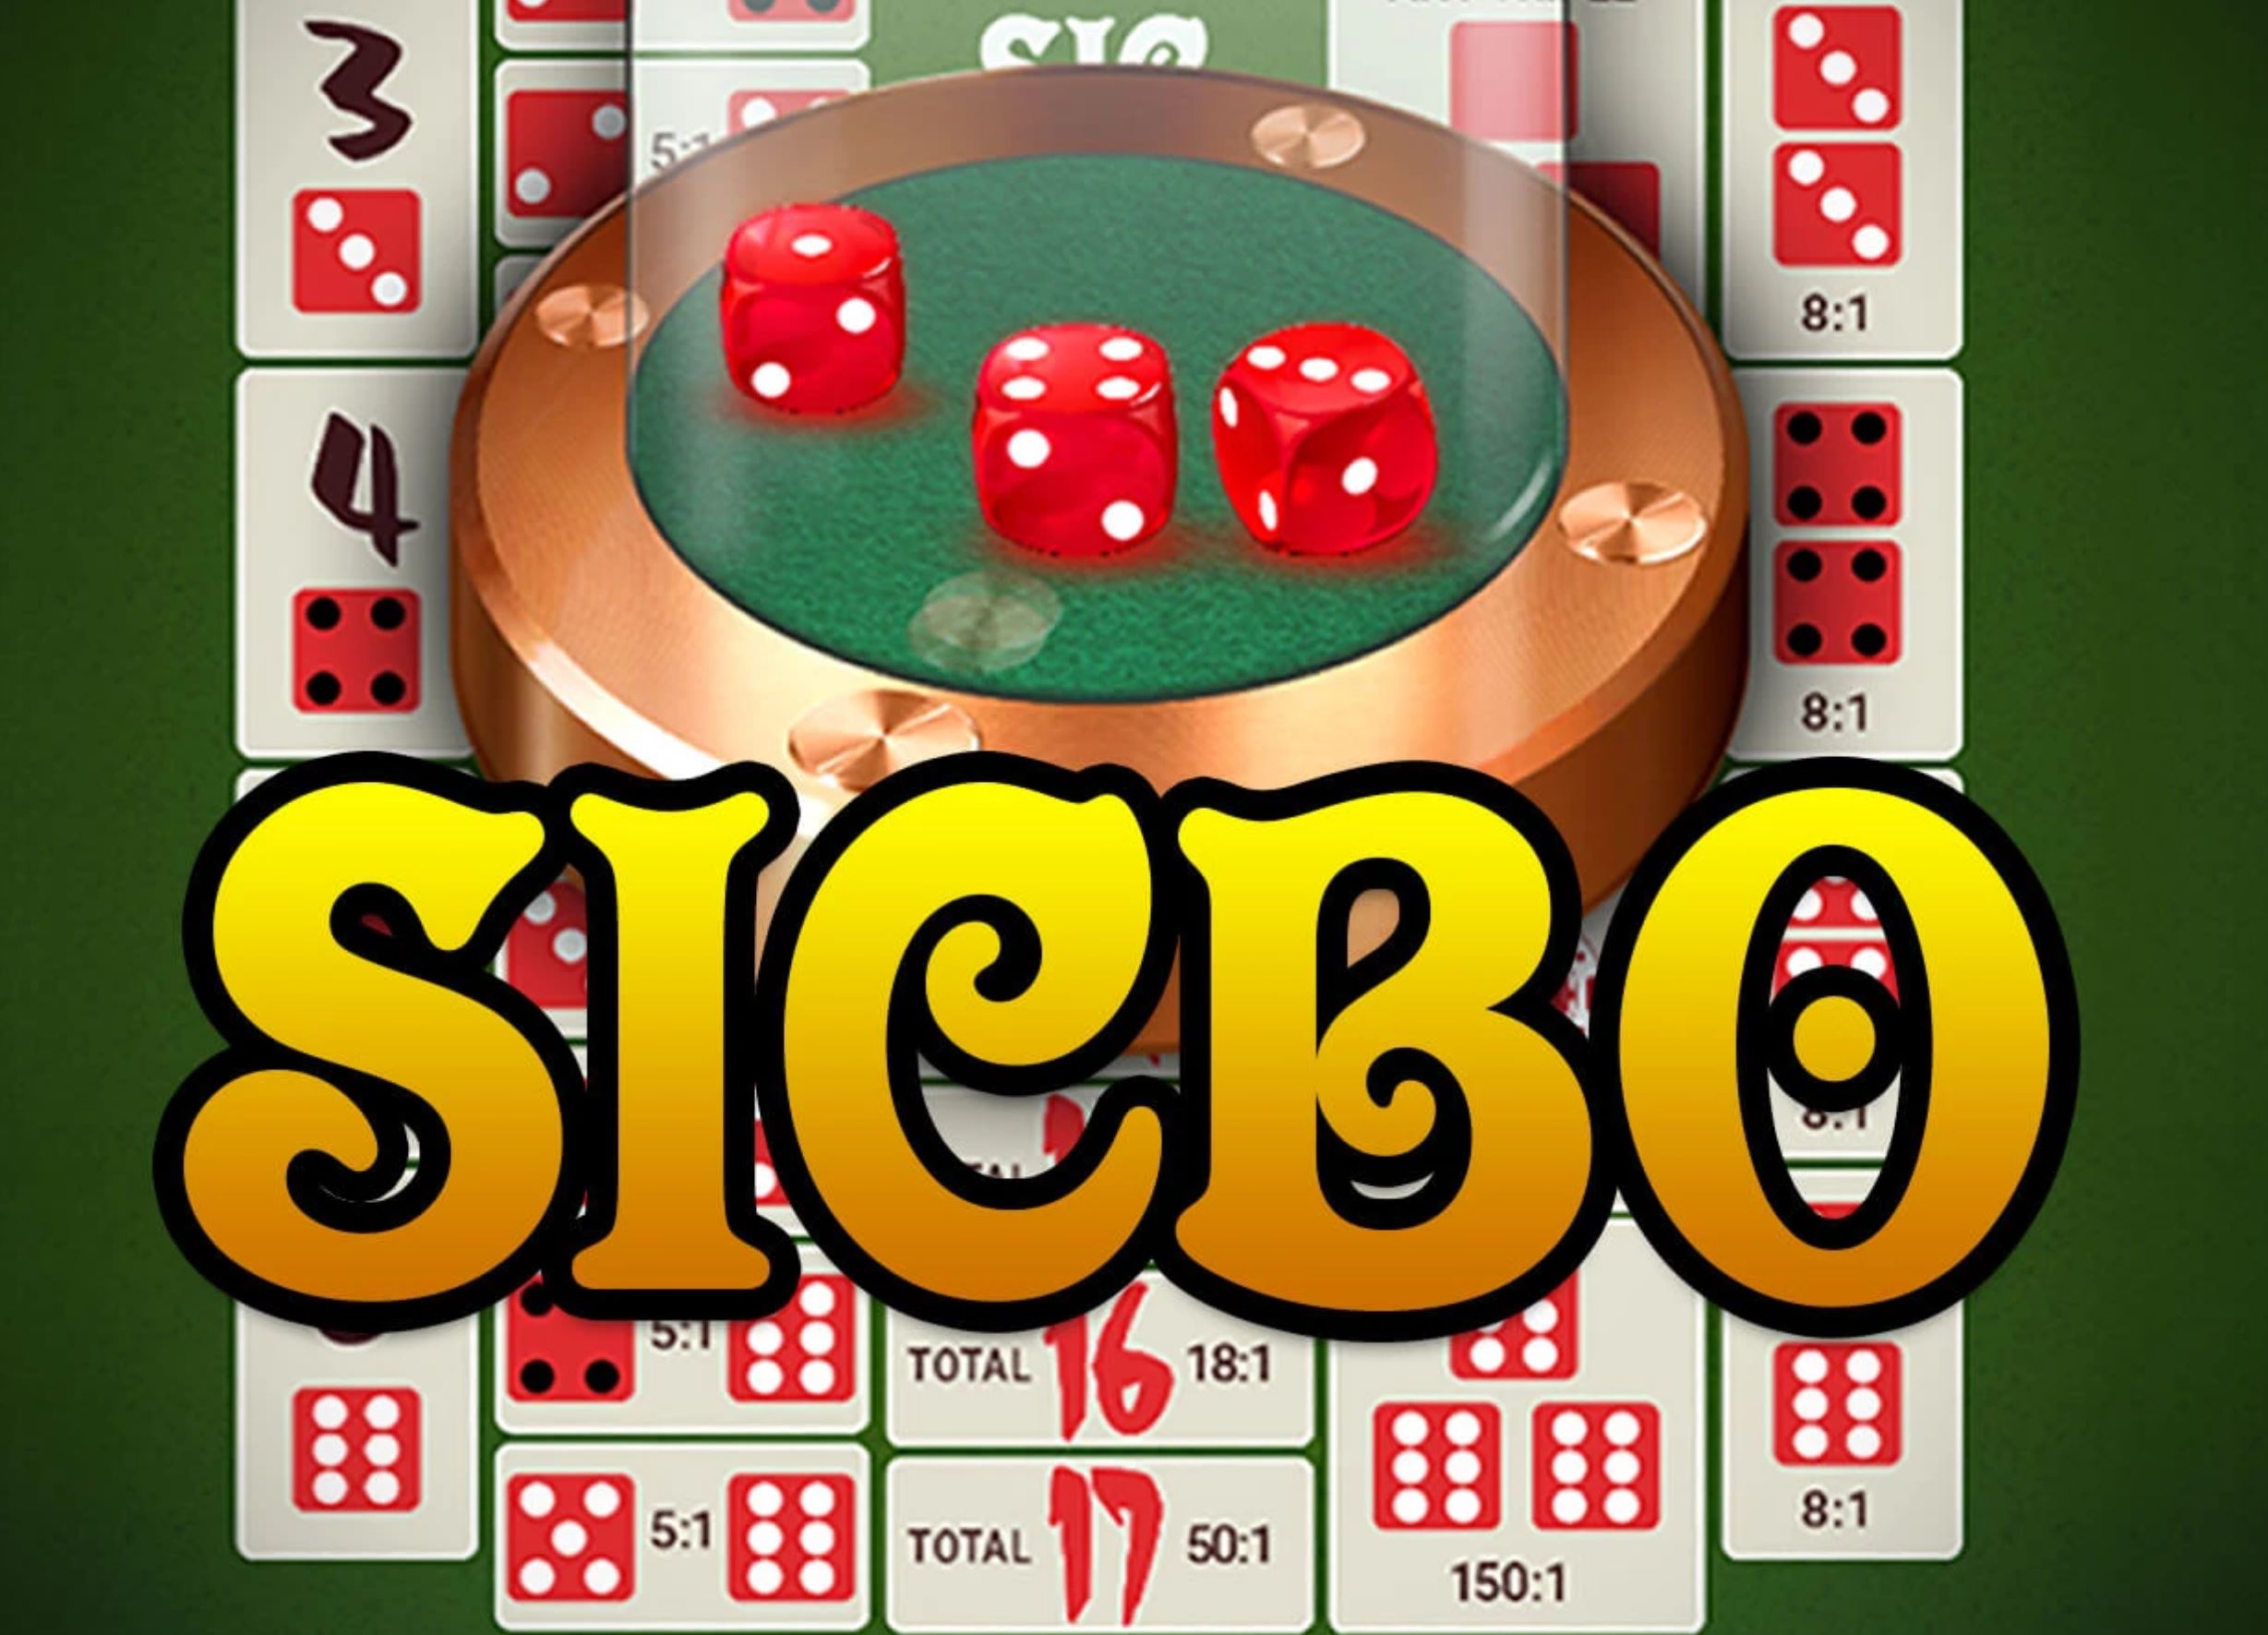 How to Play Sic Bo